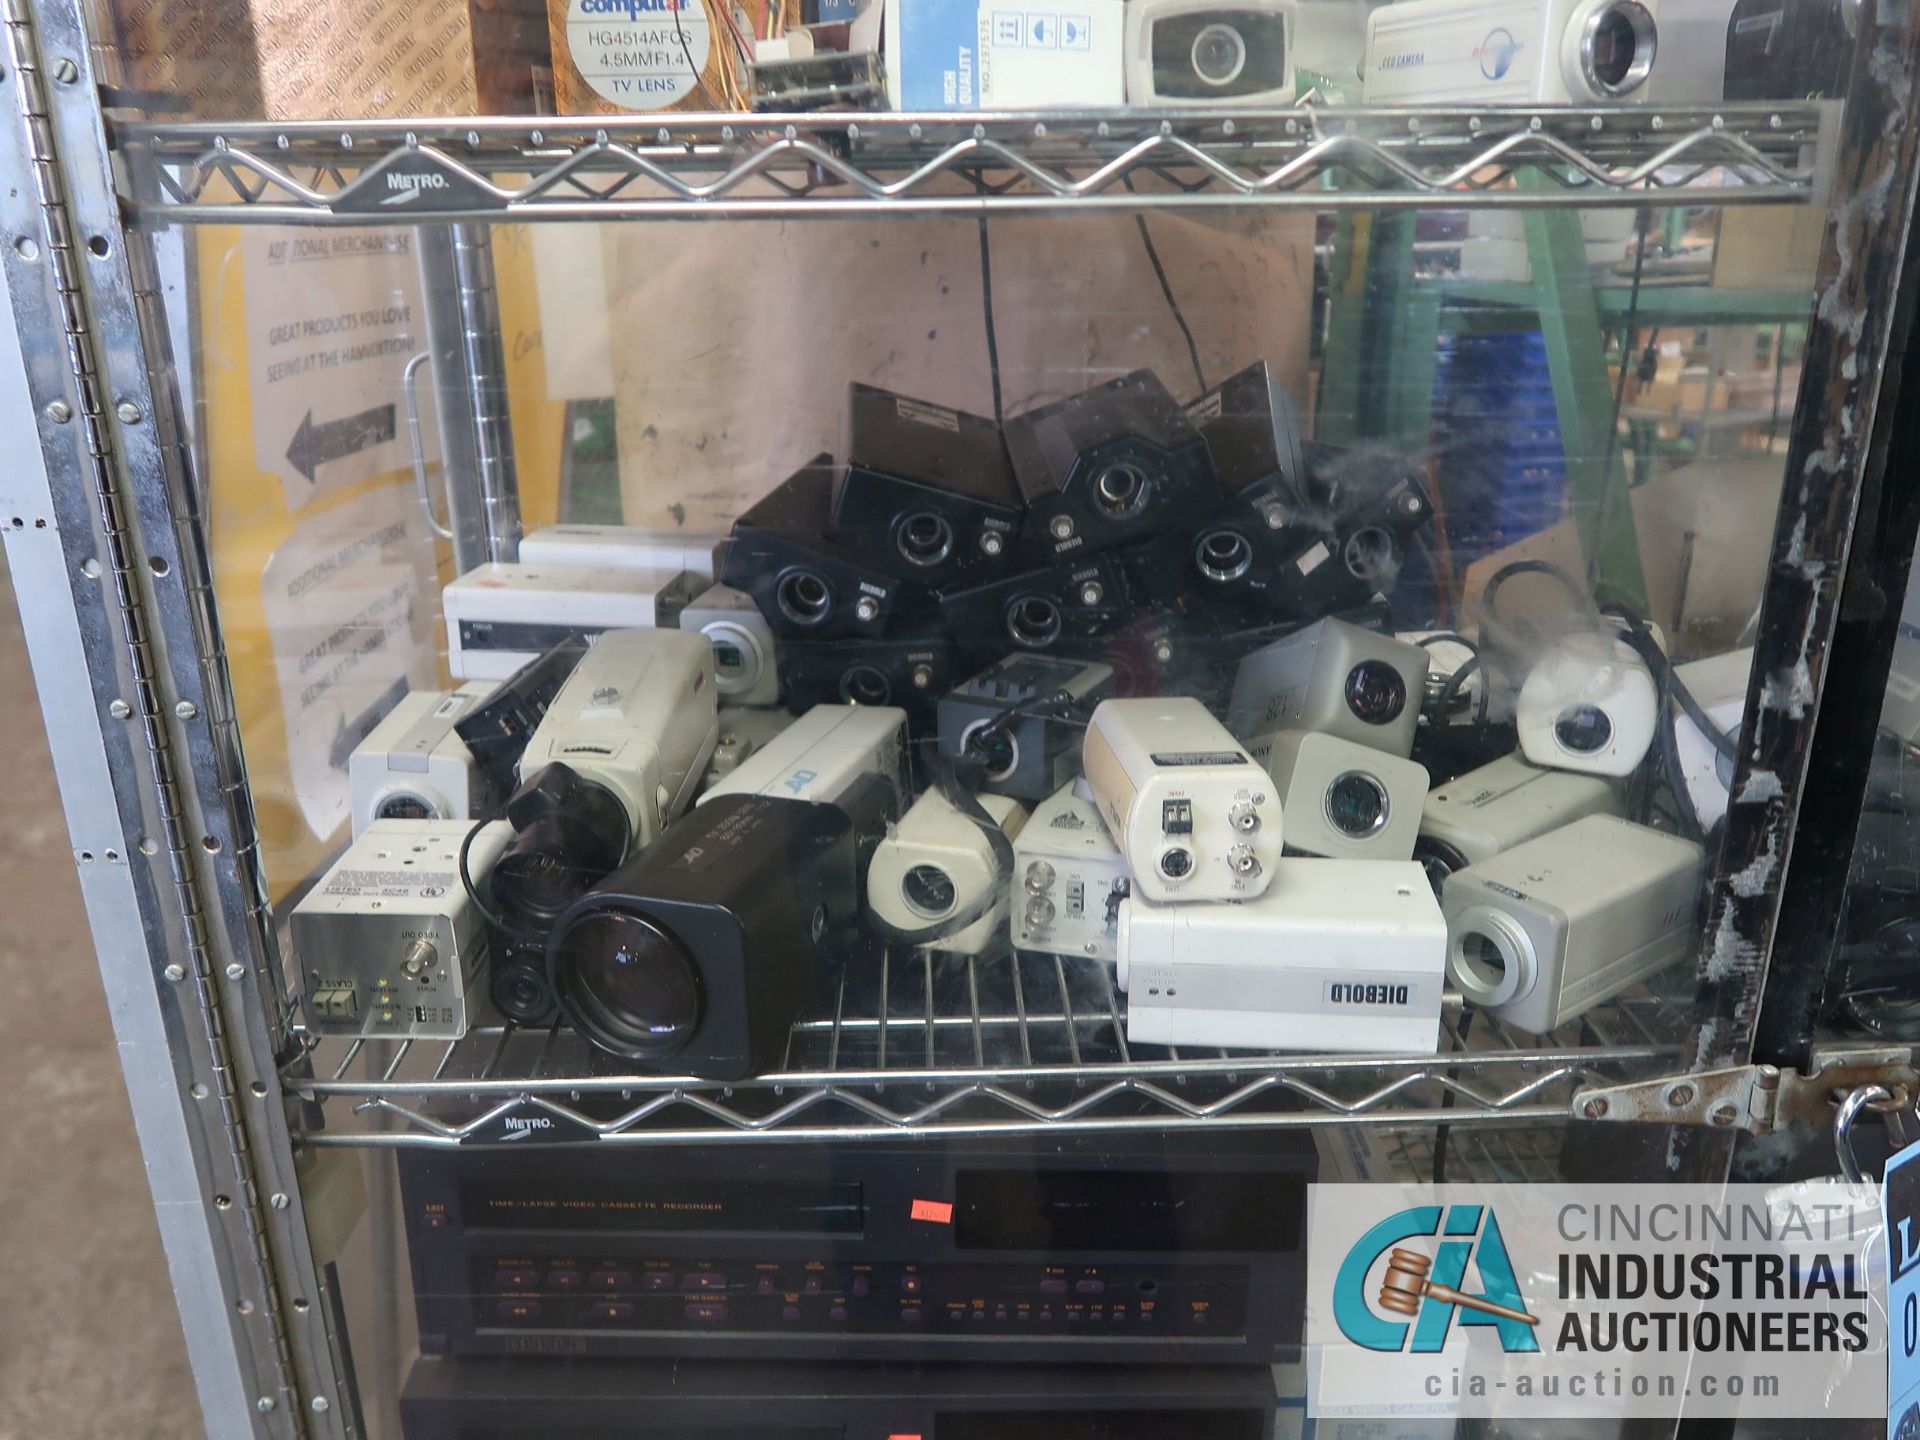 PORTABLE SHOWCASE WITH SECURITY CAMERAS, LENS, CONTROLS, VIDEO CASSETE RECORDERS - Image 2 of 5